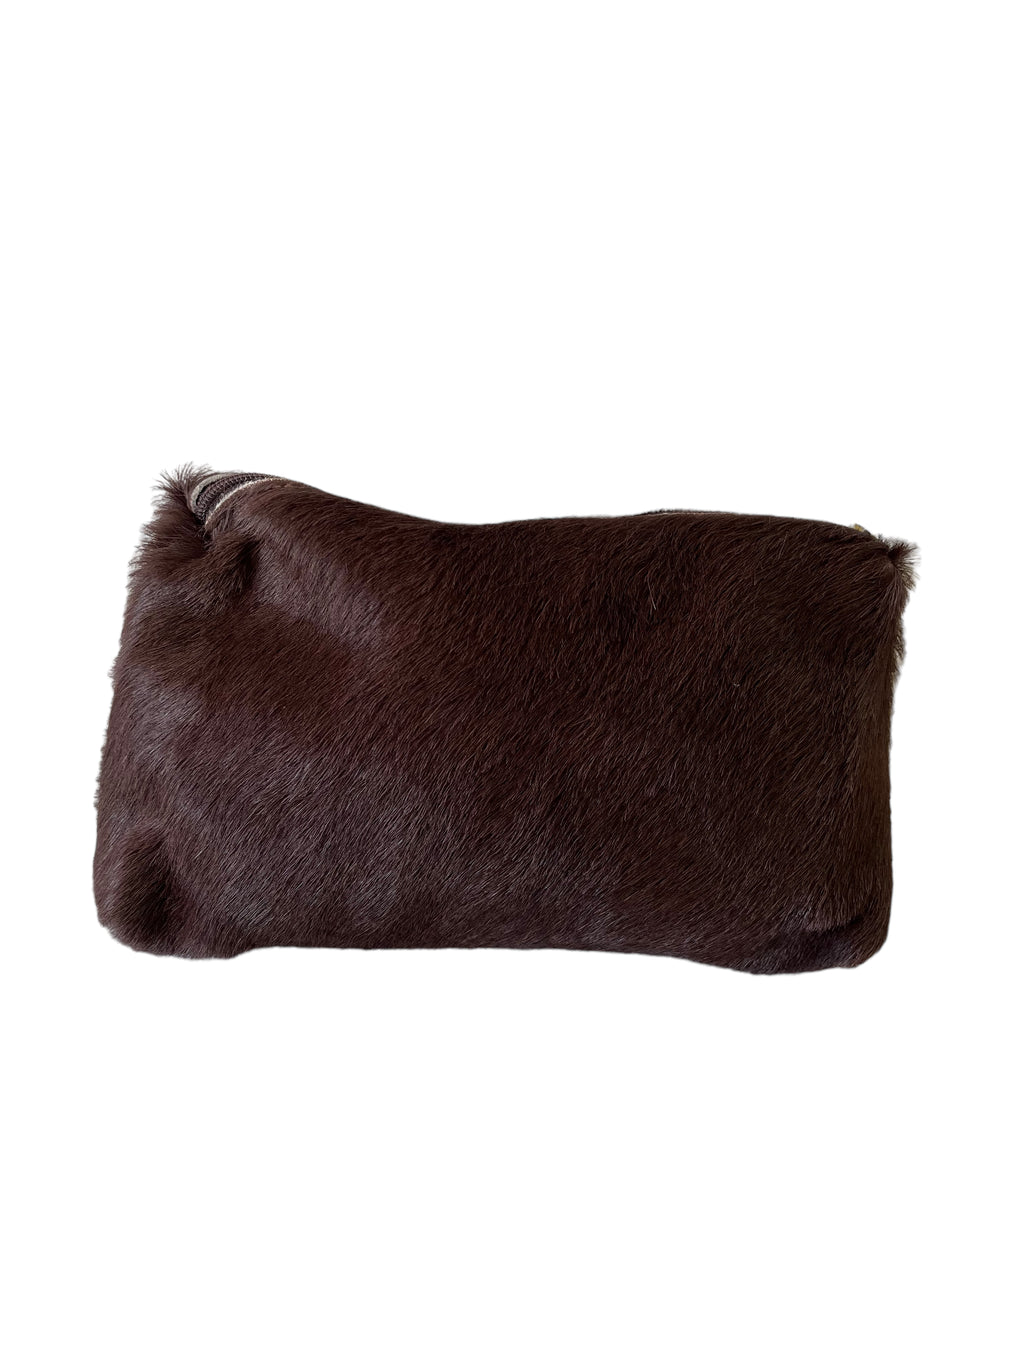 The Kempton Pouch -Brown Hair On Hide